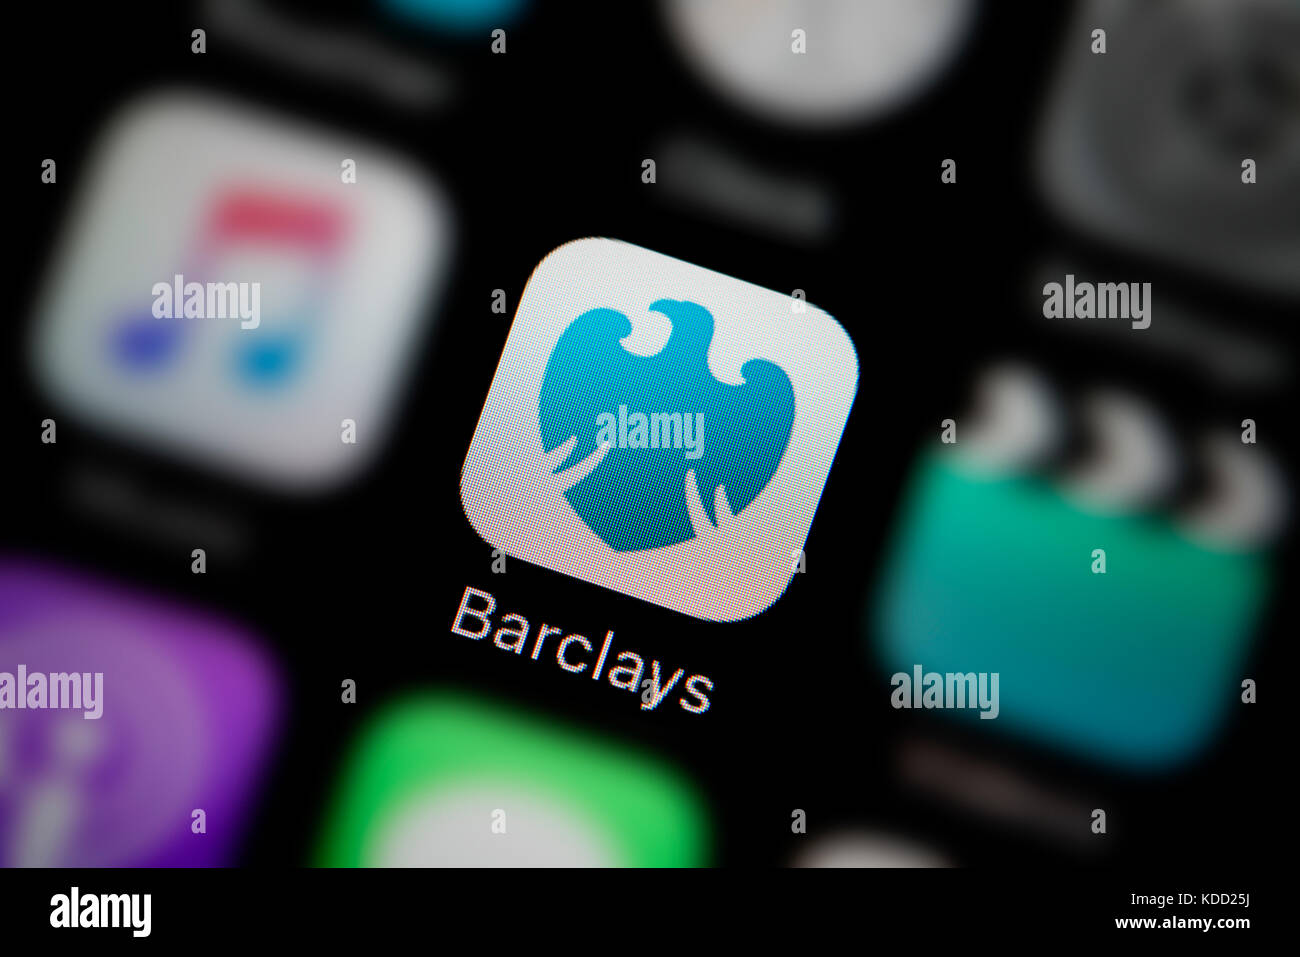 A close-up shot of the logo representing Barclays Bank app icon, as seen on the screen of a smart phone (Editorial use only) Stock Photo